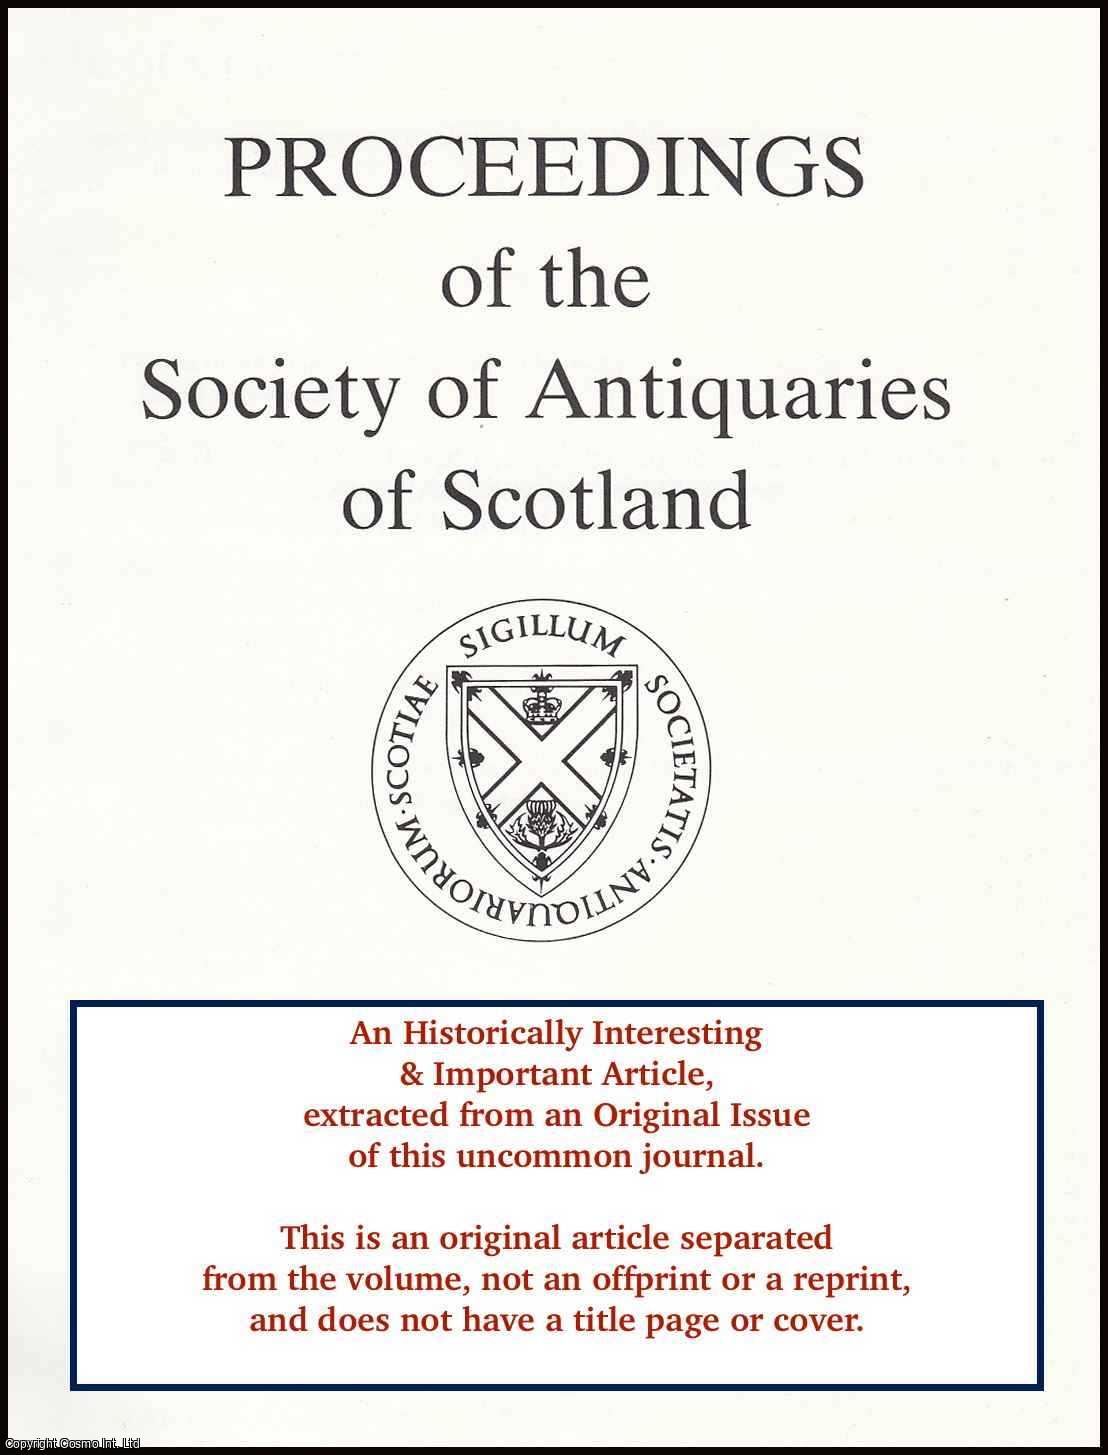 Jon C. Henderson - A Survey of Cronnogs in The Lake of Menteith, Stirlingshire. An original article from the Proceedings of the Society of Antiquaries of Scotland, 1998.